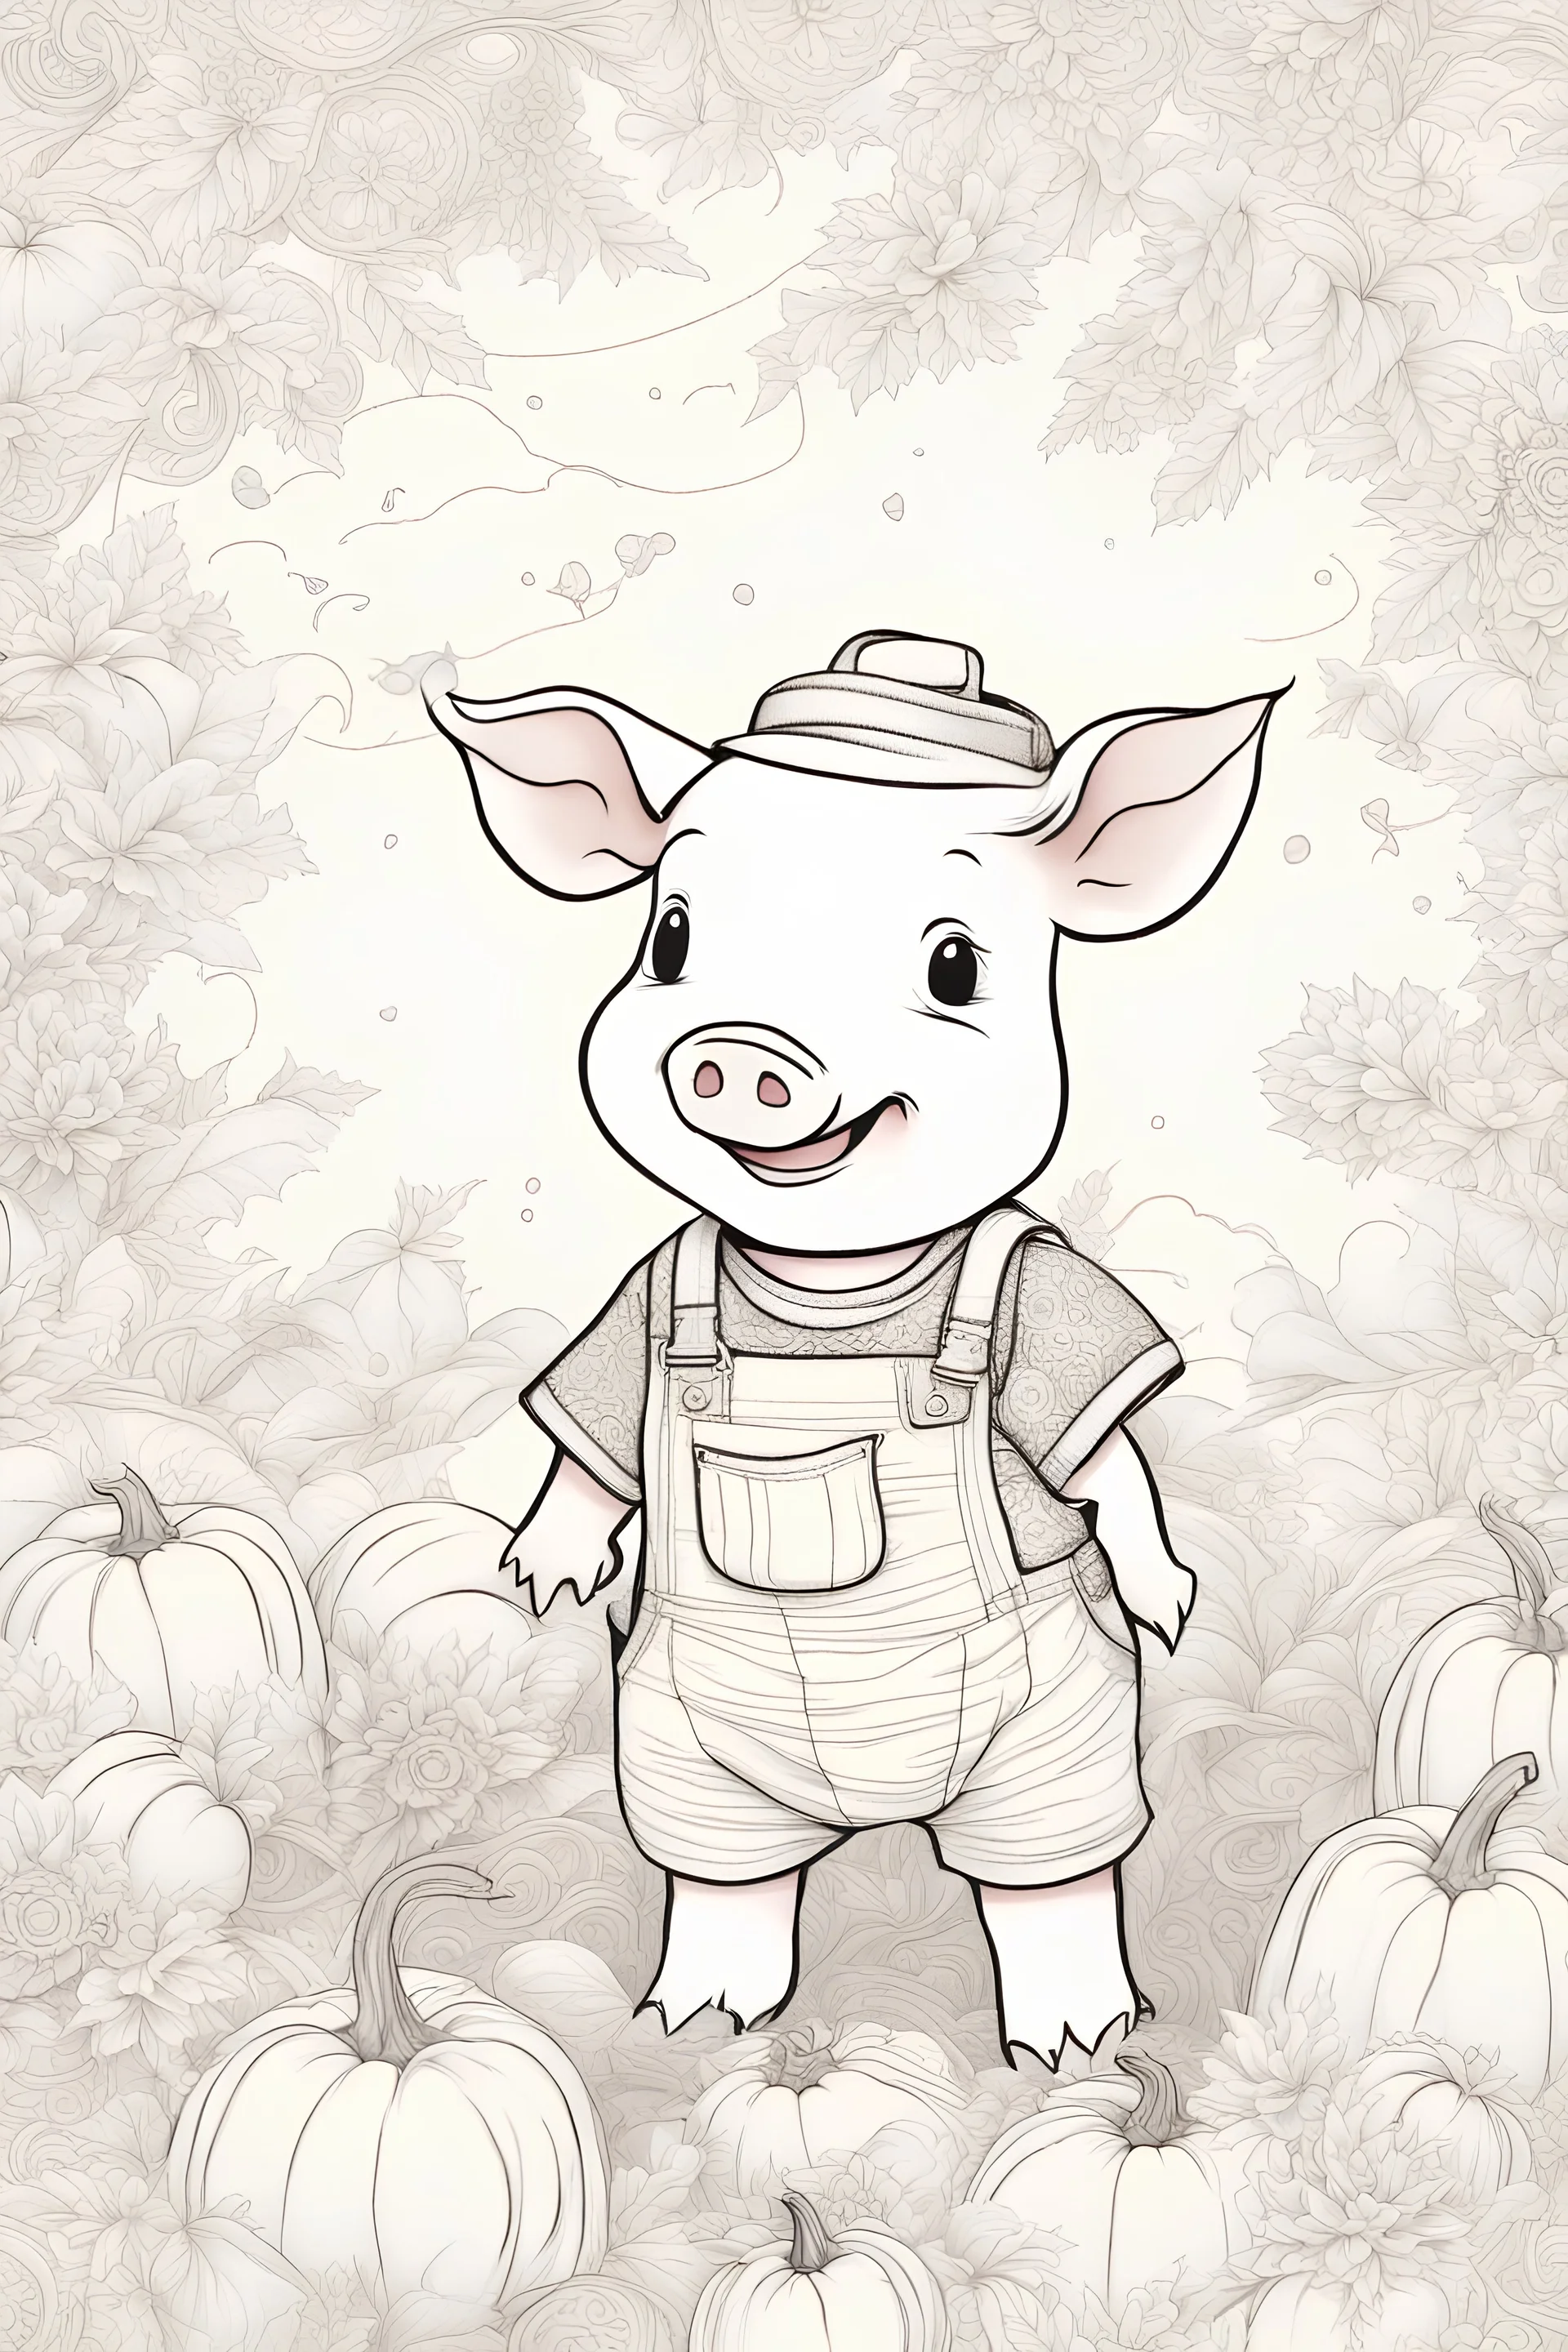 Piggy's Pumpkin Patch Adventure: A jovial piglet, dressed in tiny overalls, happily navigating a pumpkin patch. The overalls have intricate mandala-style patterns, and the clear line art gives a charming, rustic feel. The background is a serene white.